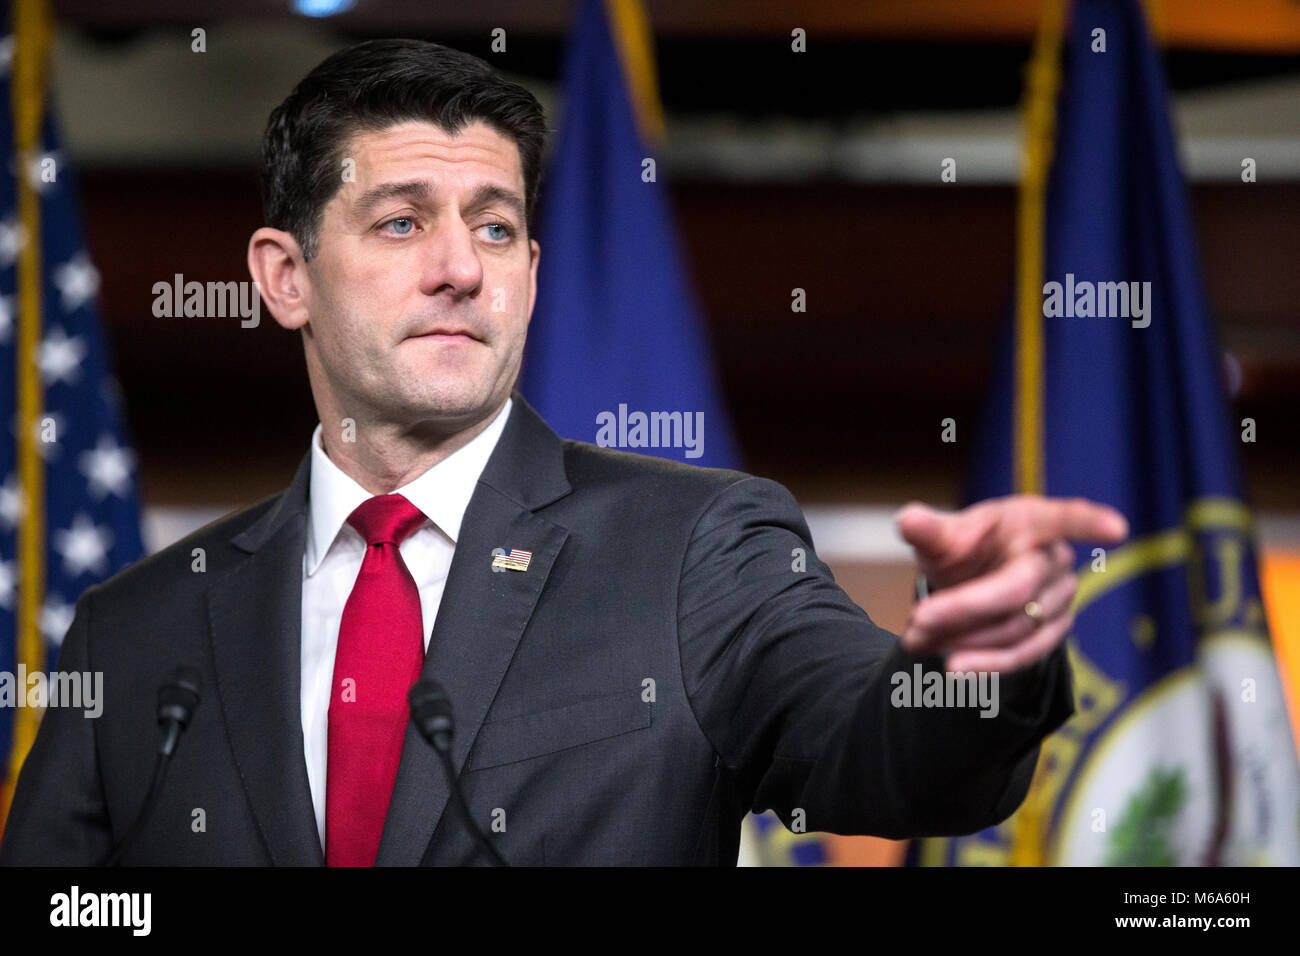 Washington, DC, USA. 08th Feb, 2018. Speaker of the House Paul Ryan responds to a question from the news media during a press conference on military readiness and spending in the US Capitol in Washington, DC, USA, 08 February 2018. The Senate will vote today on a two year budget deal, that will then go to the House for their up or down vote with a government shutdown in the balance. Credit: Shawn Thew/Pool via CNP · NO WIRE SERVICE · Credit: Shawn Thew/Consolidated News Photos/Shawn Thew - Pool via CNP/dpa/Alamy Live News Stock Photo